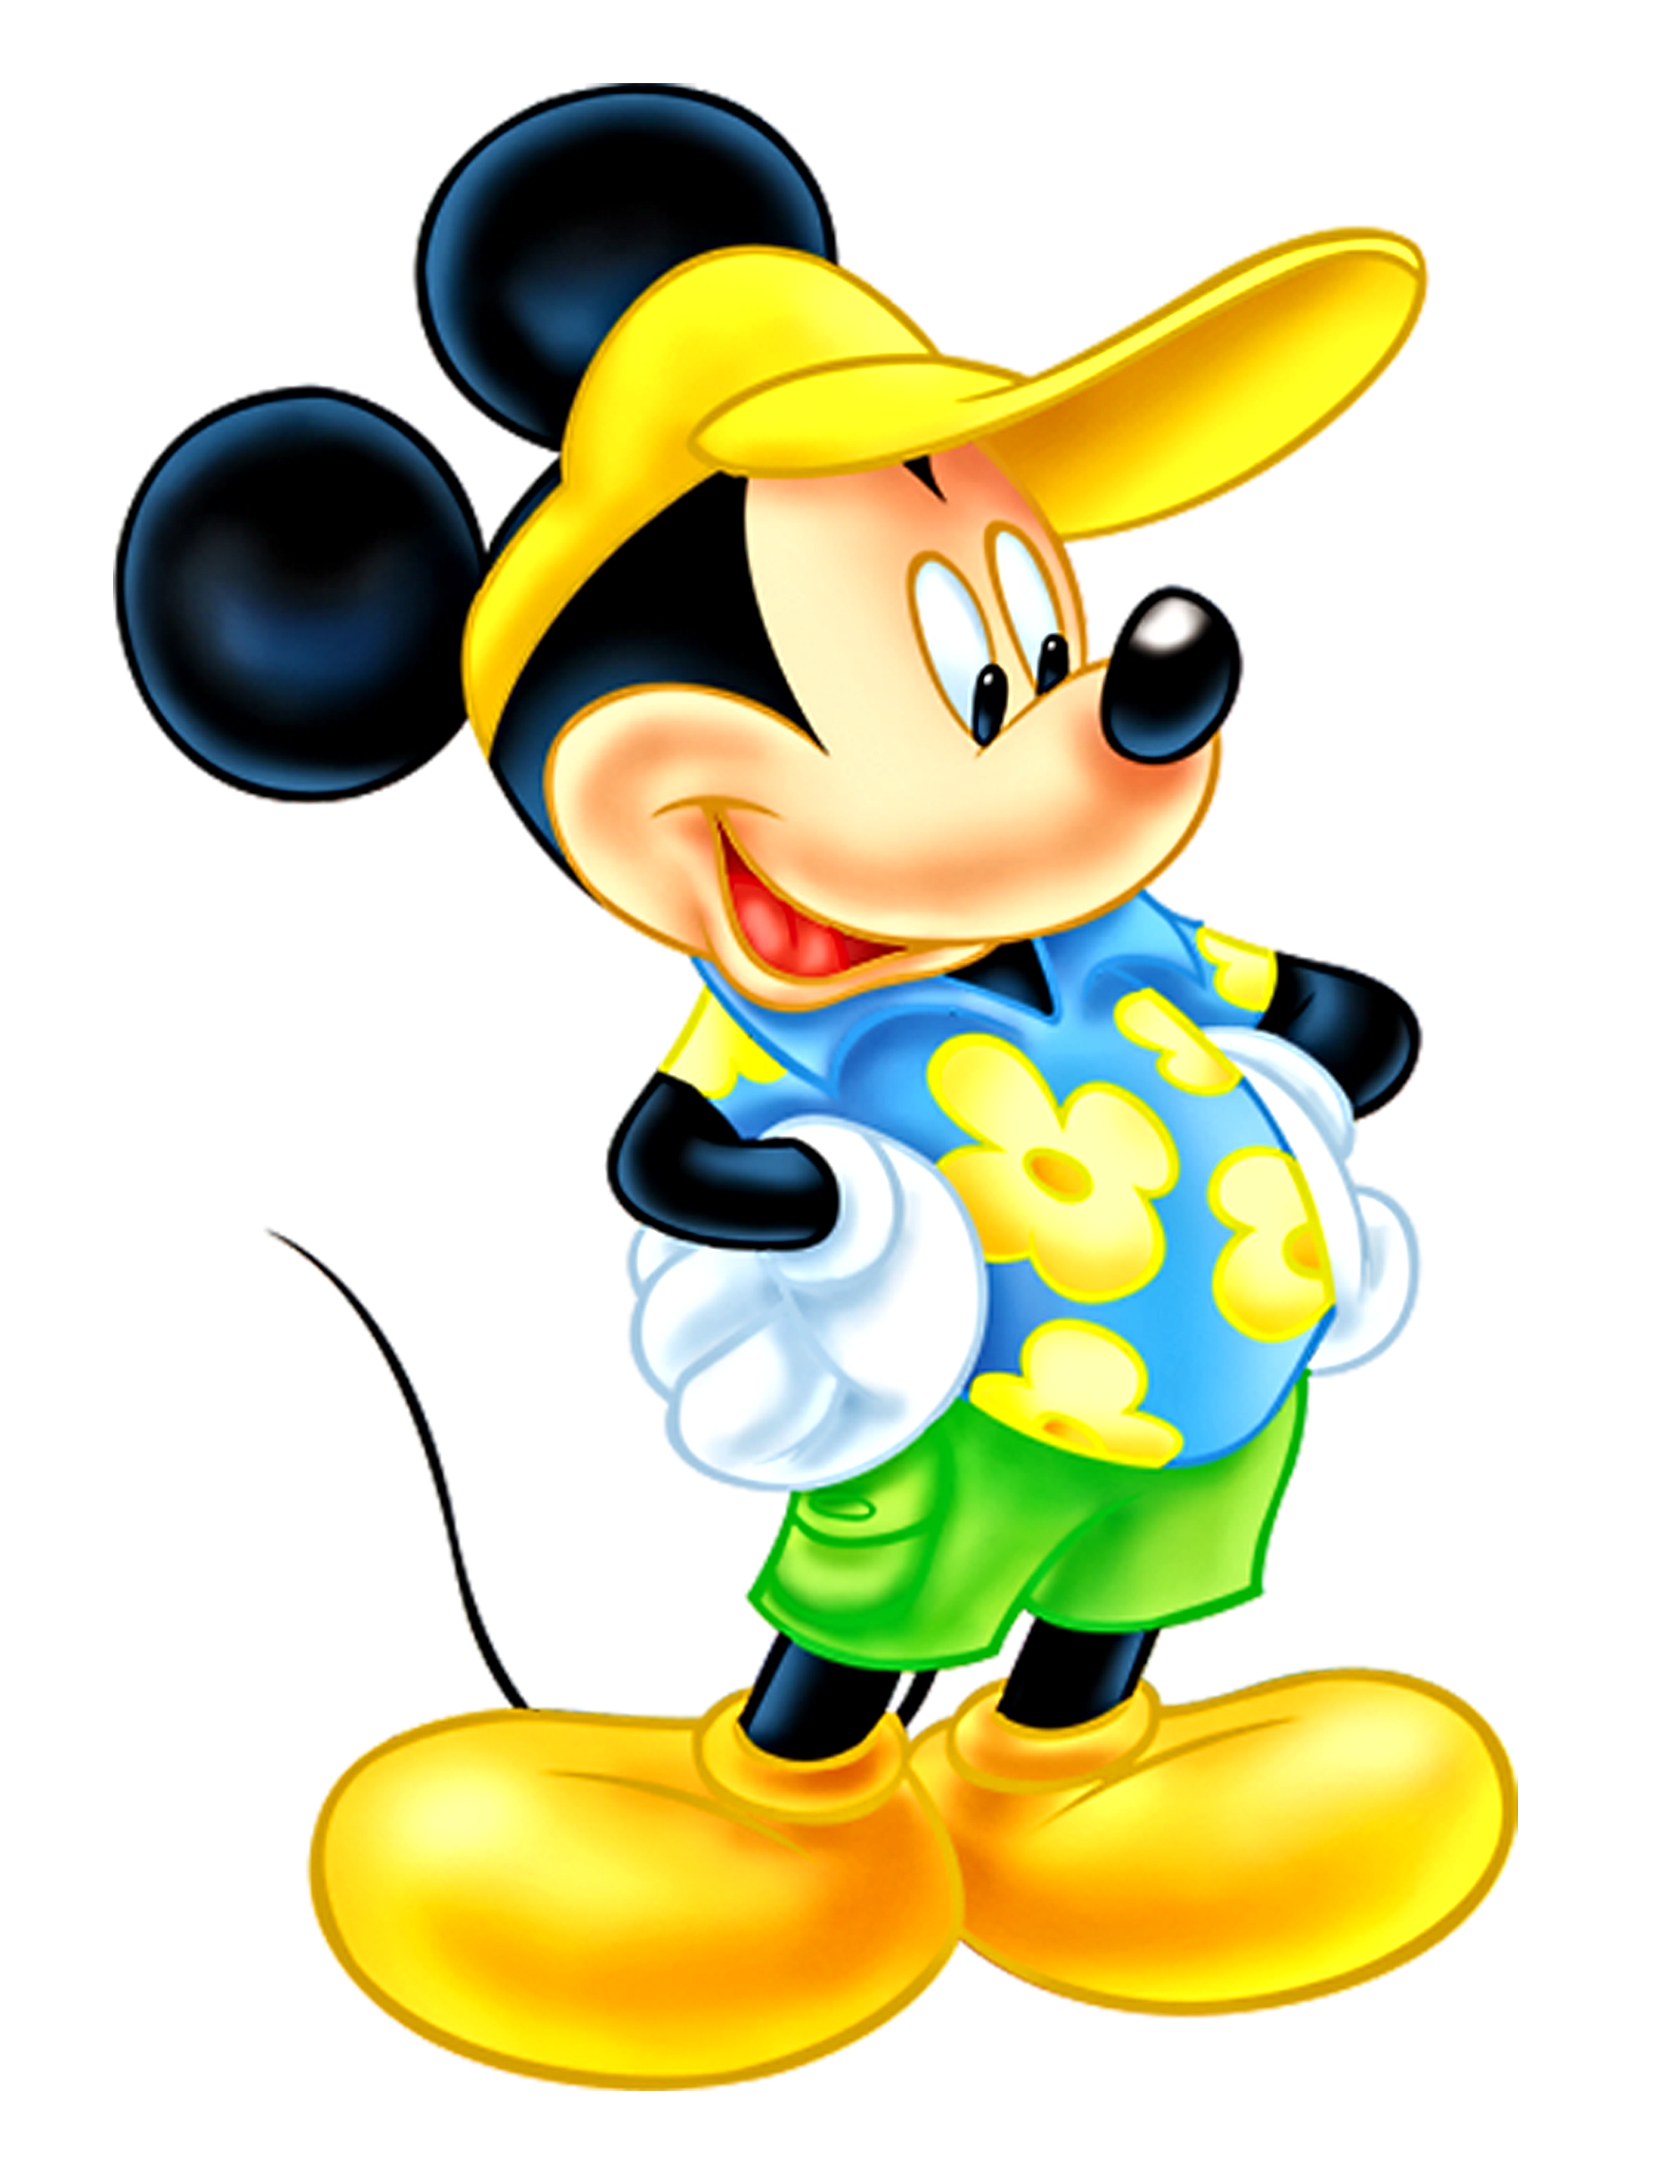 Mickey mouse highres png. Flute clipart sri krishna